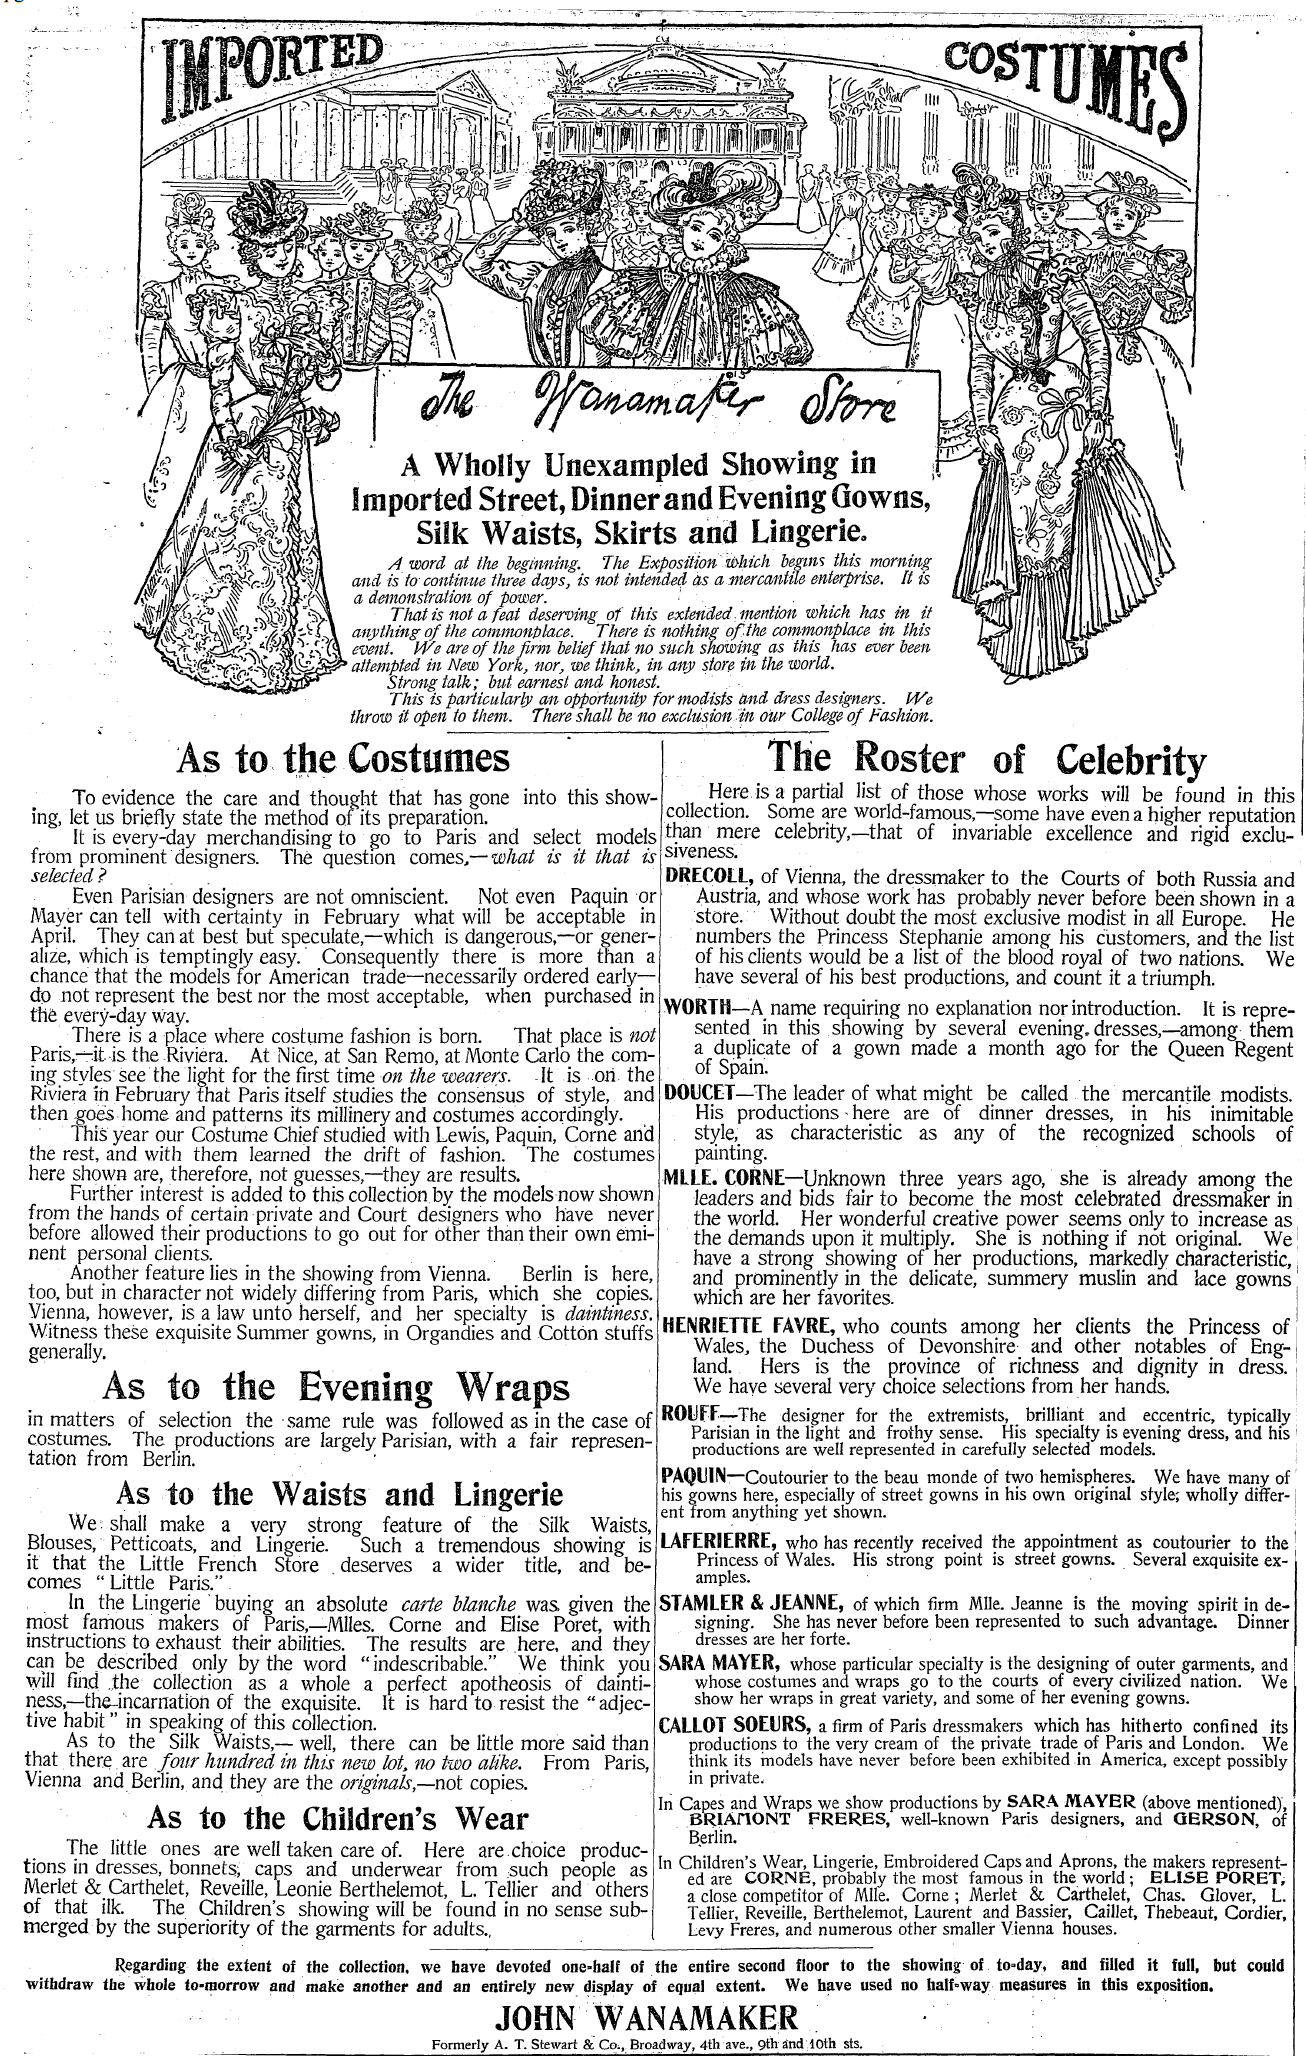  “The Wanamaker Store” Advertisement.  New York Times,  March 31, 1898. ( New York Times  Digital Archives.)    